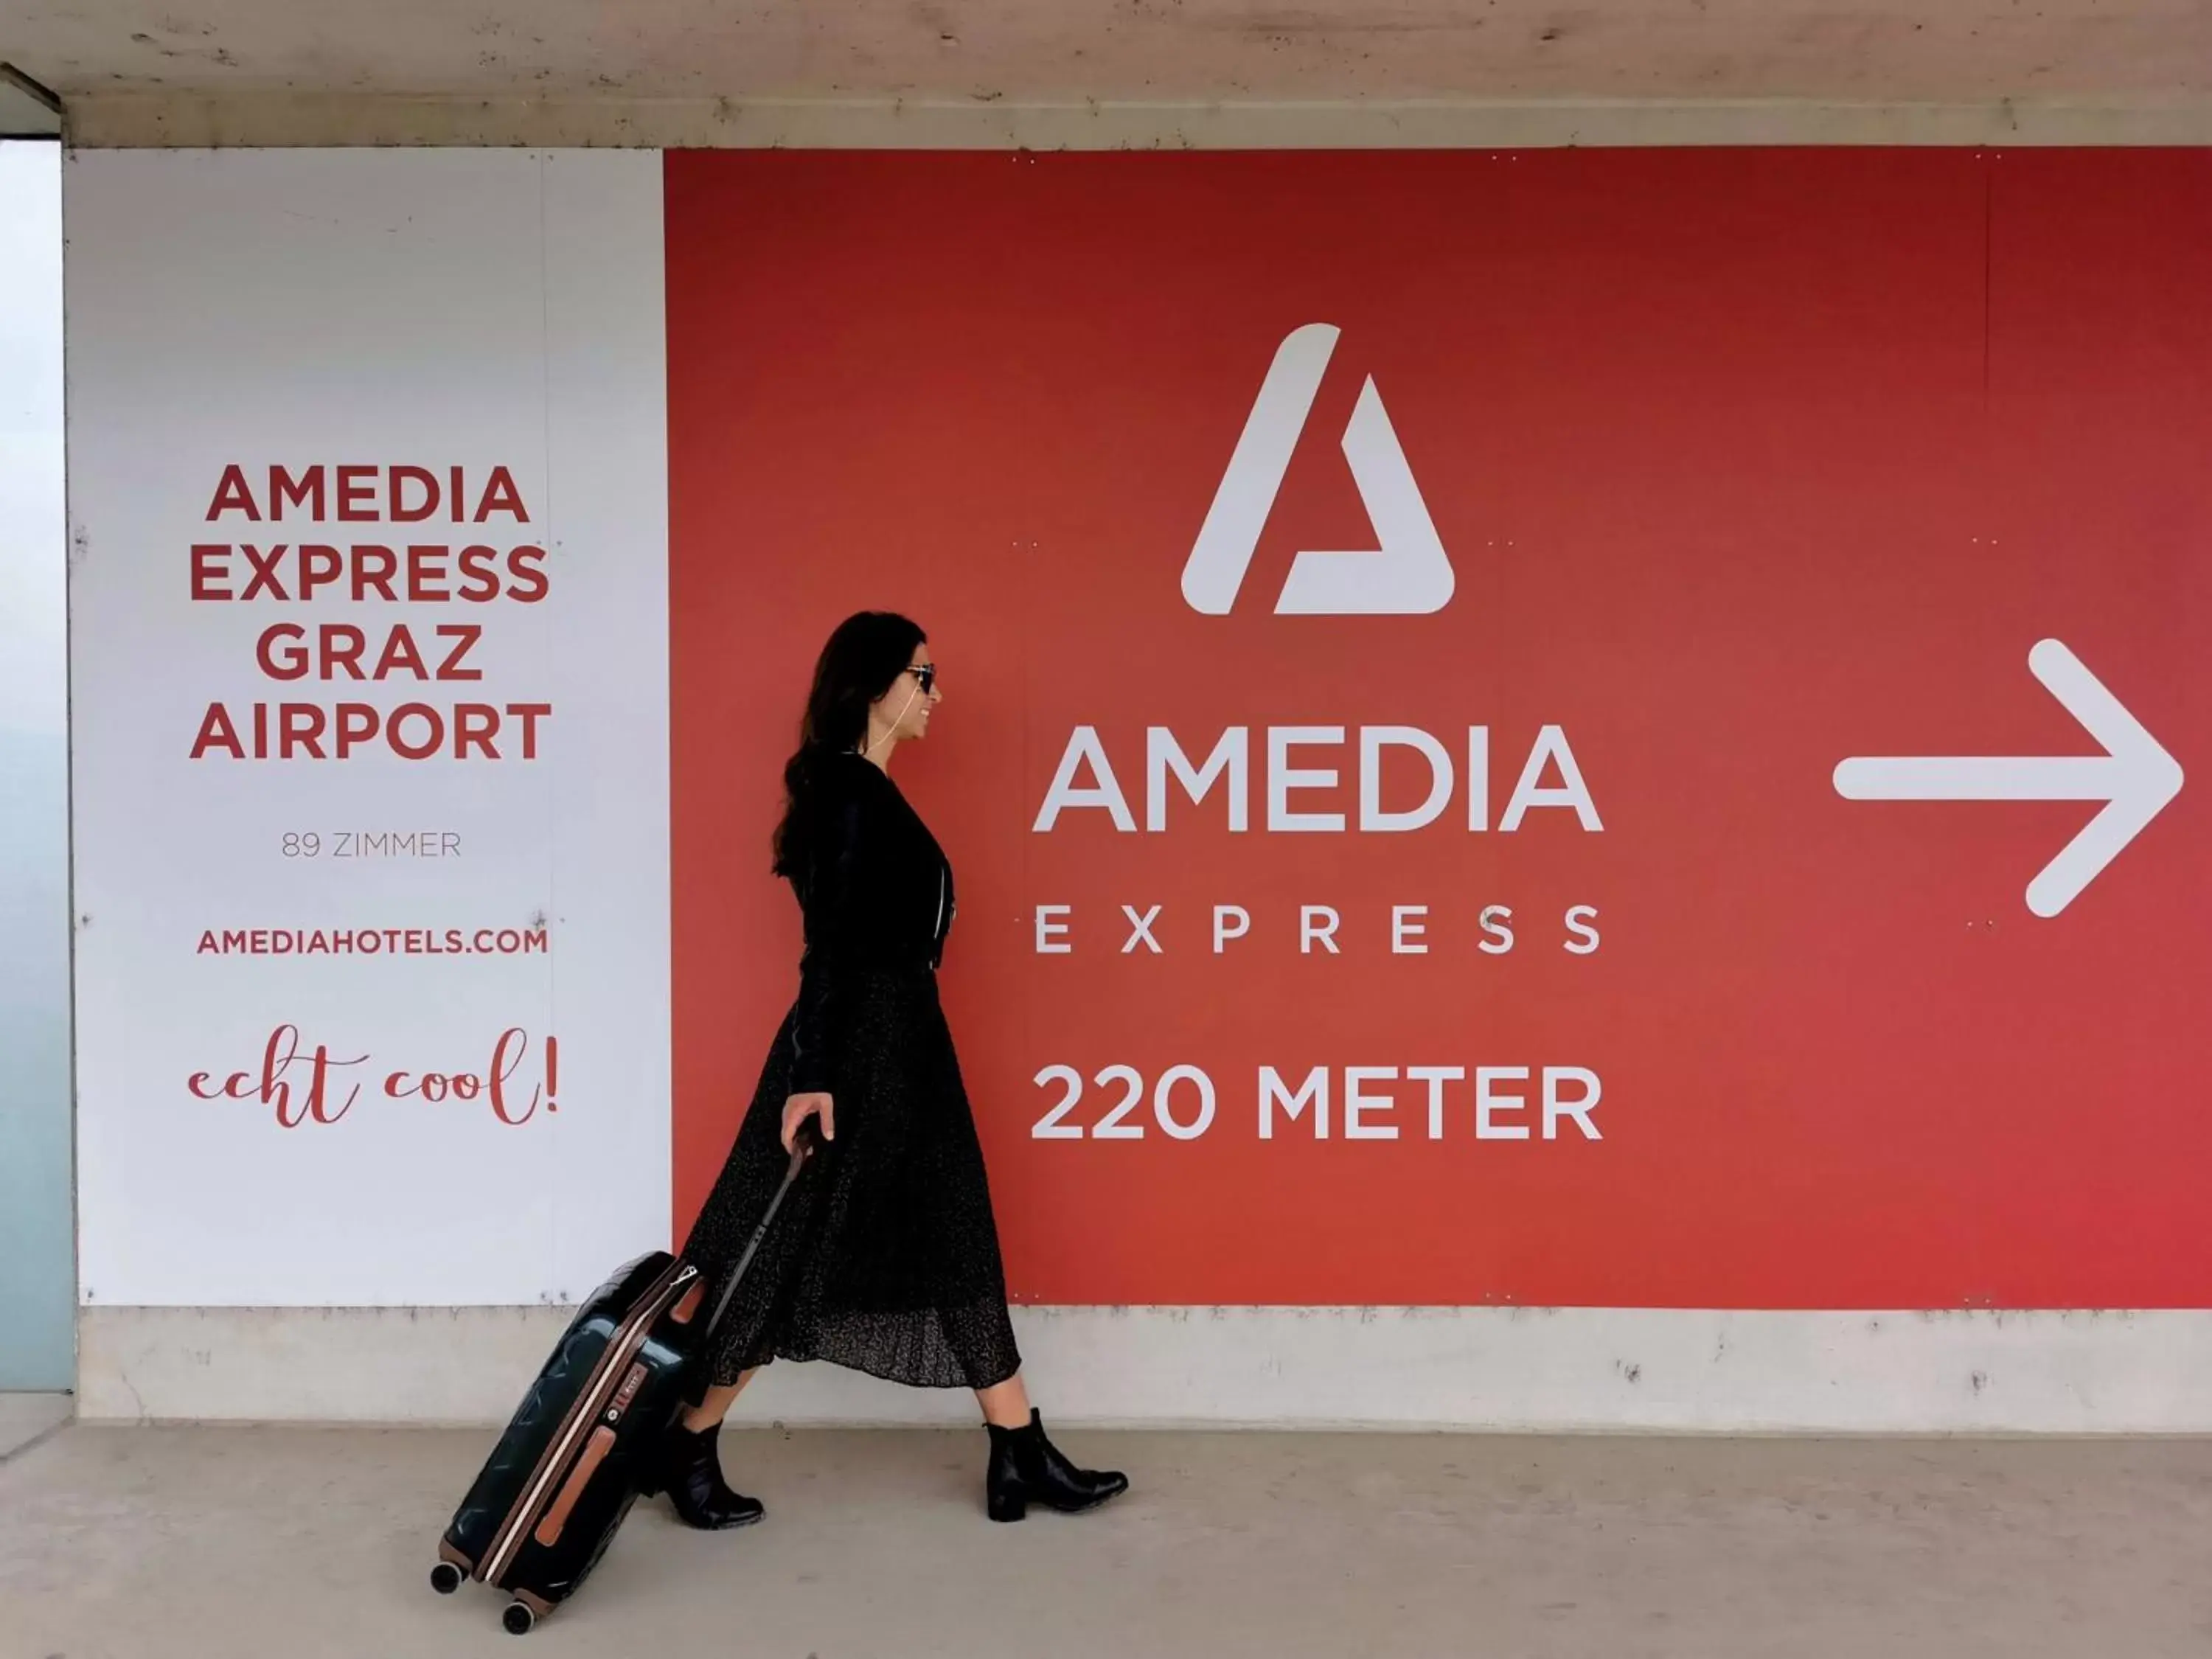 Property logo or sign in Amedia Express Graz Airport, Trademark Collection by Wyndham